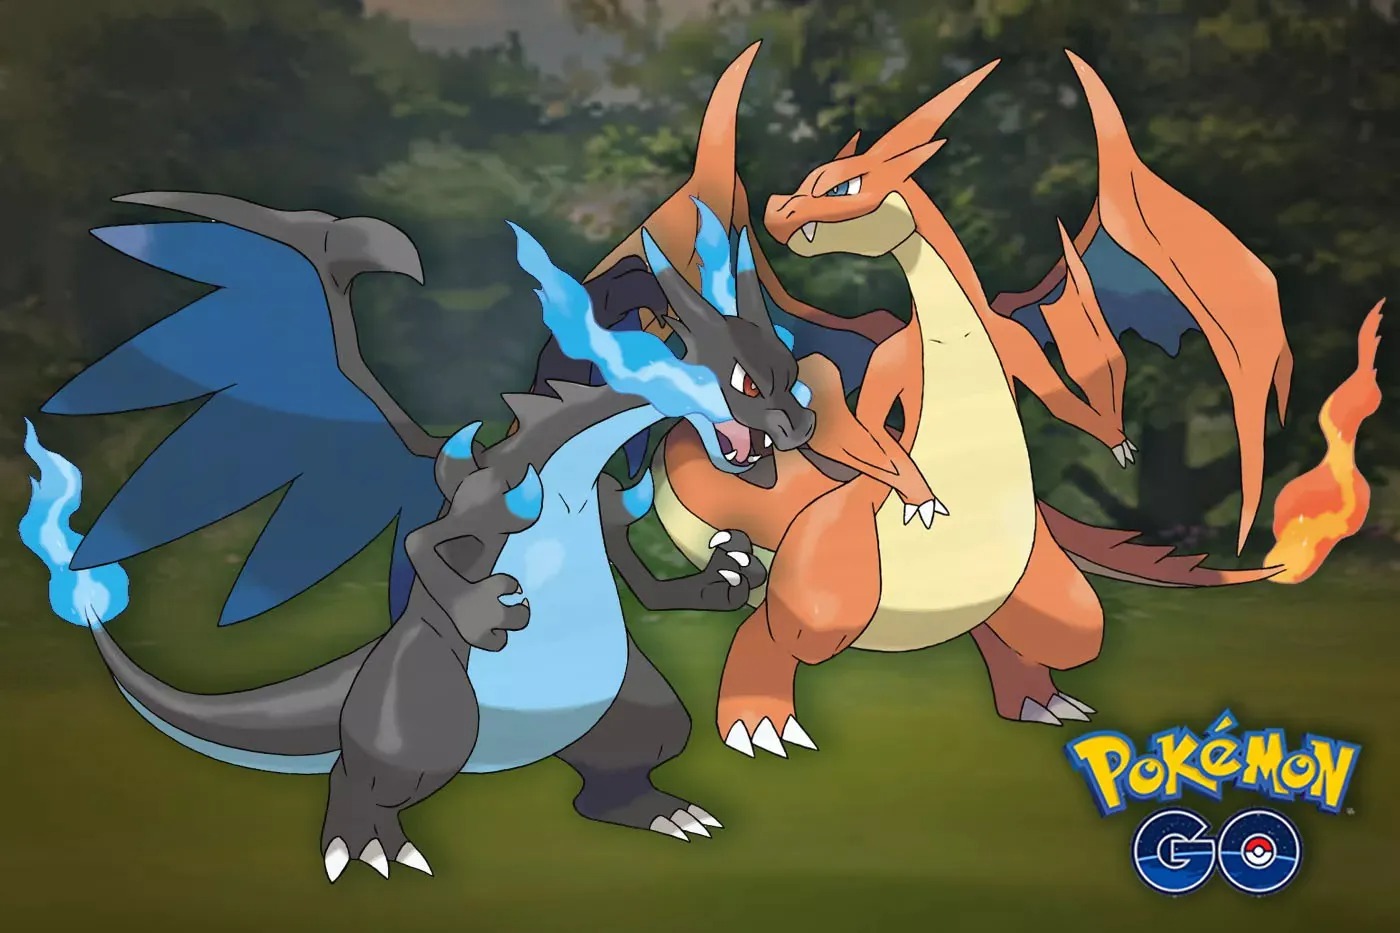 In this article, we are going to go over how to get Mega Energy in Pokemon GO, so you can get Mega Evolutions of your favorite Pokemon and dominate the battle.